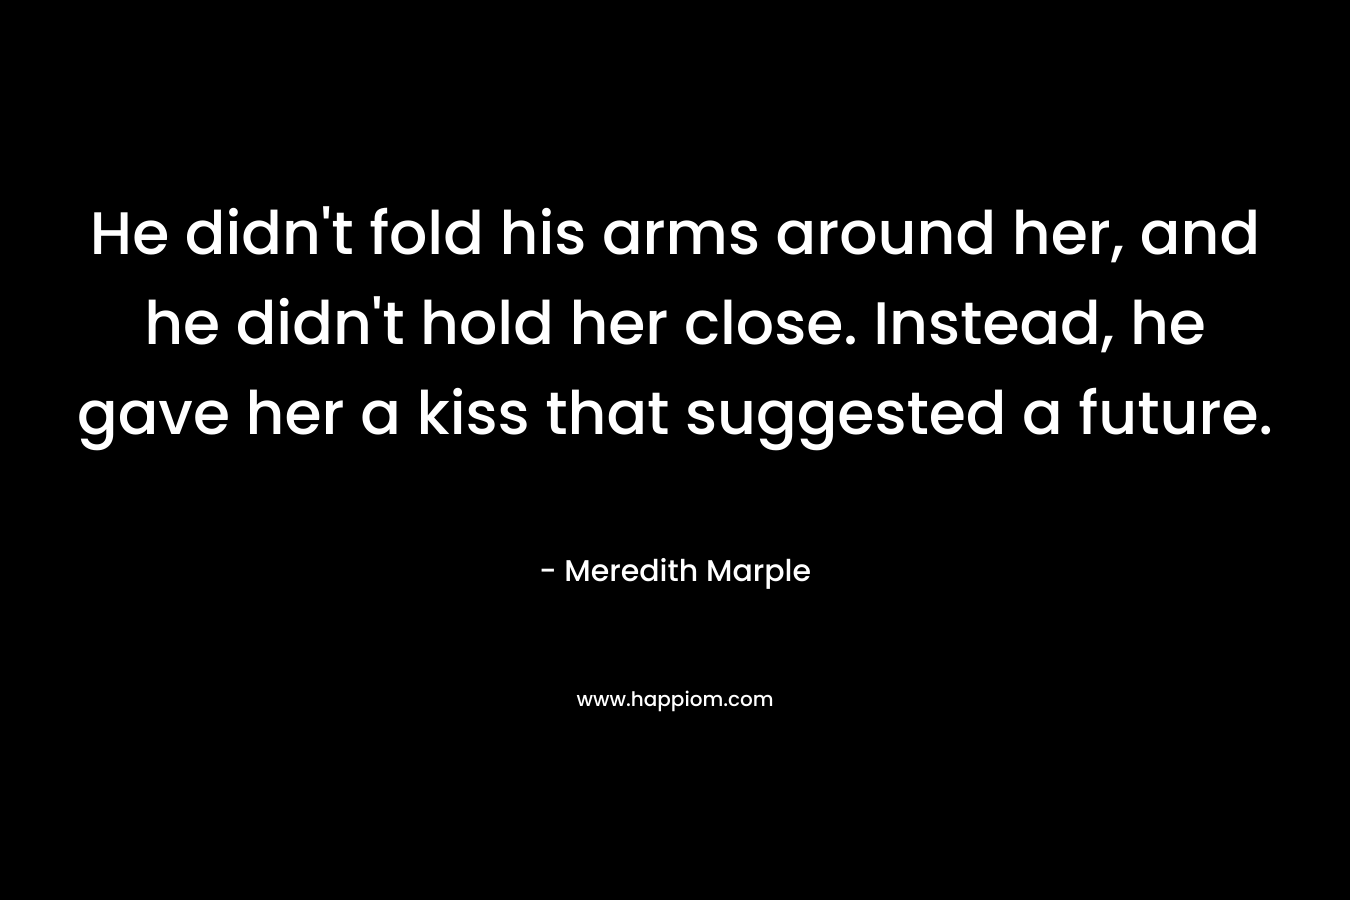 He didn’t fold his arms around her, and he didn’t hold her close. Instead, he gave her a kiss that suggested a future. – Meredith Marple